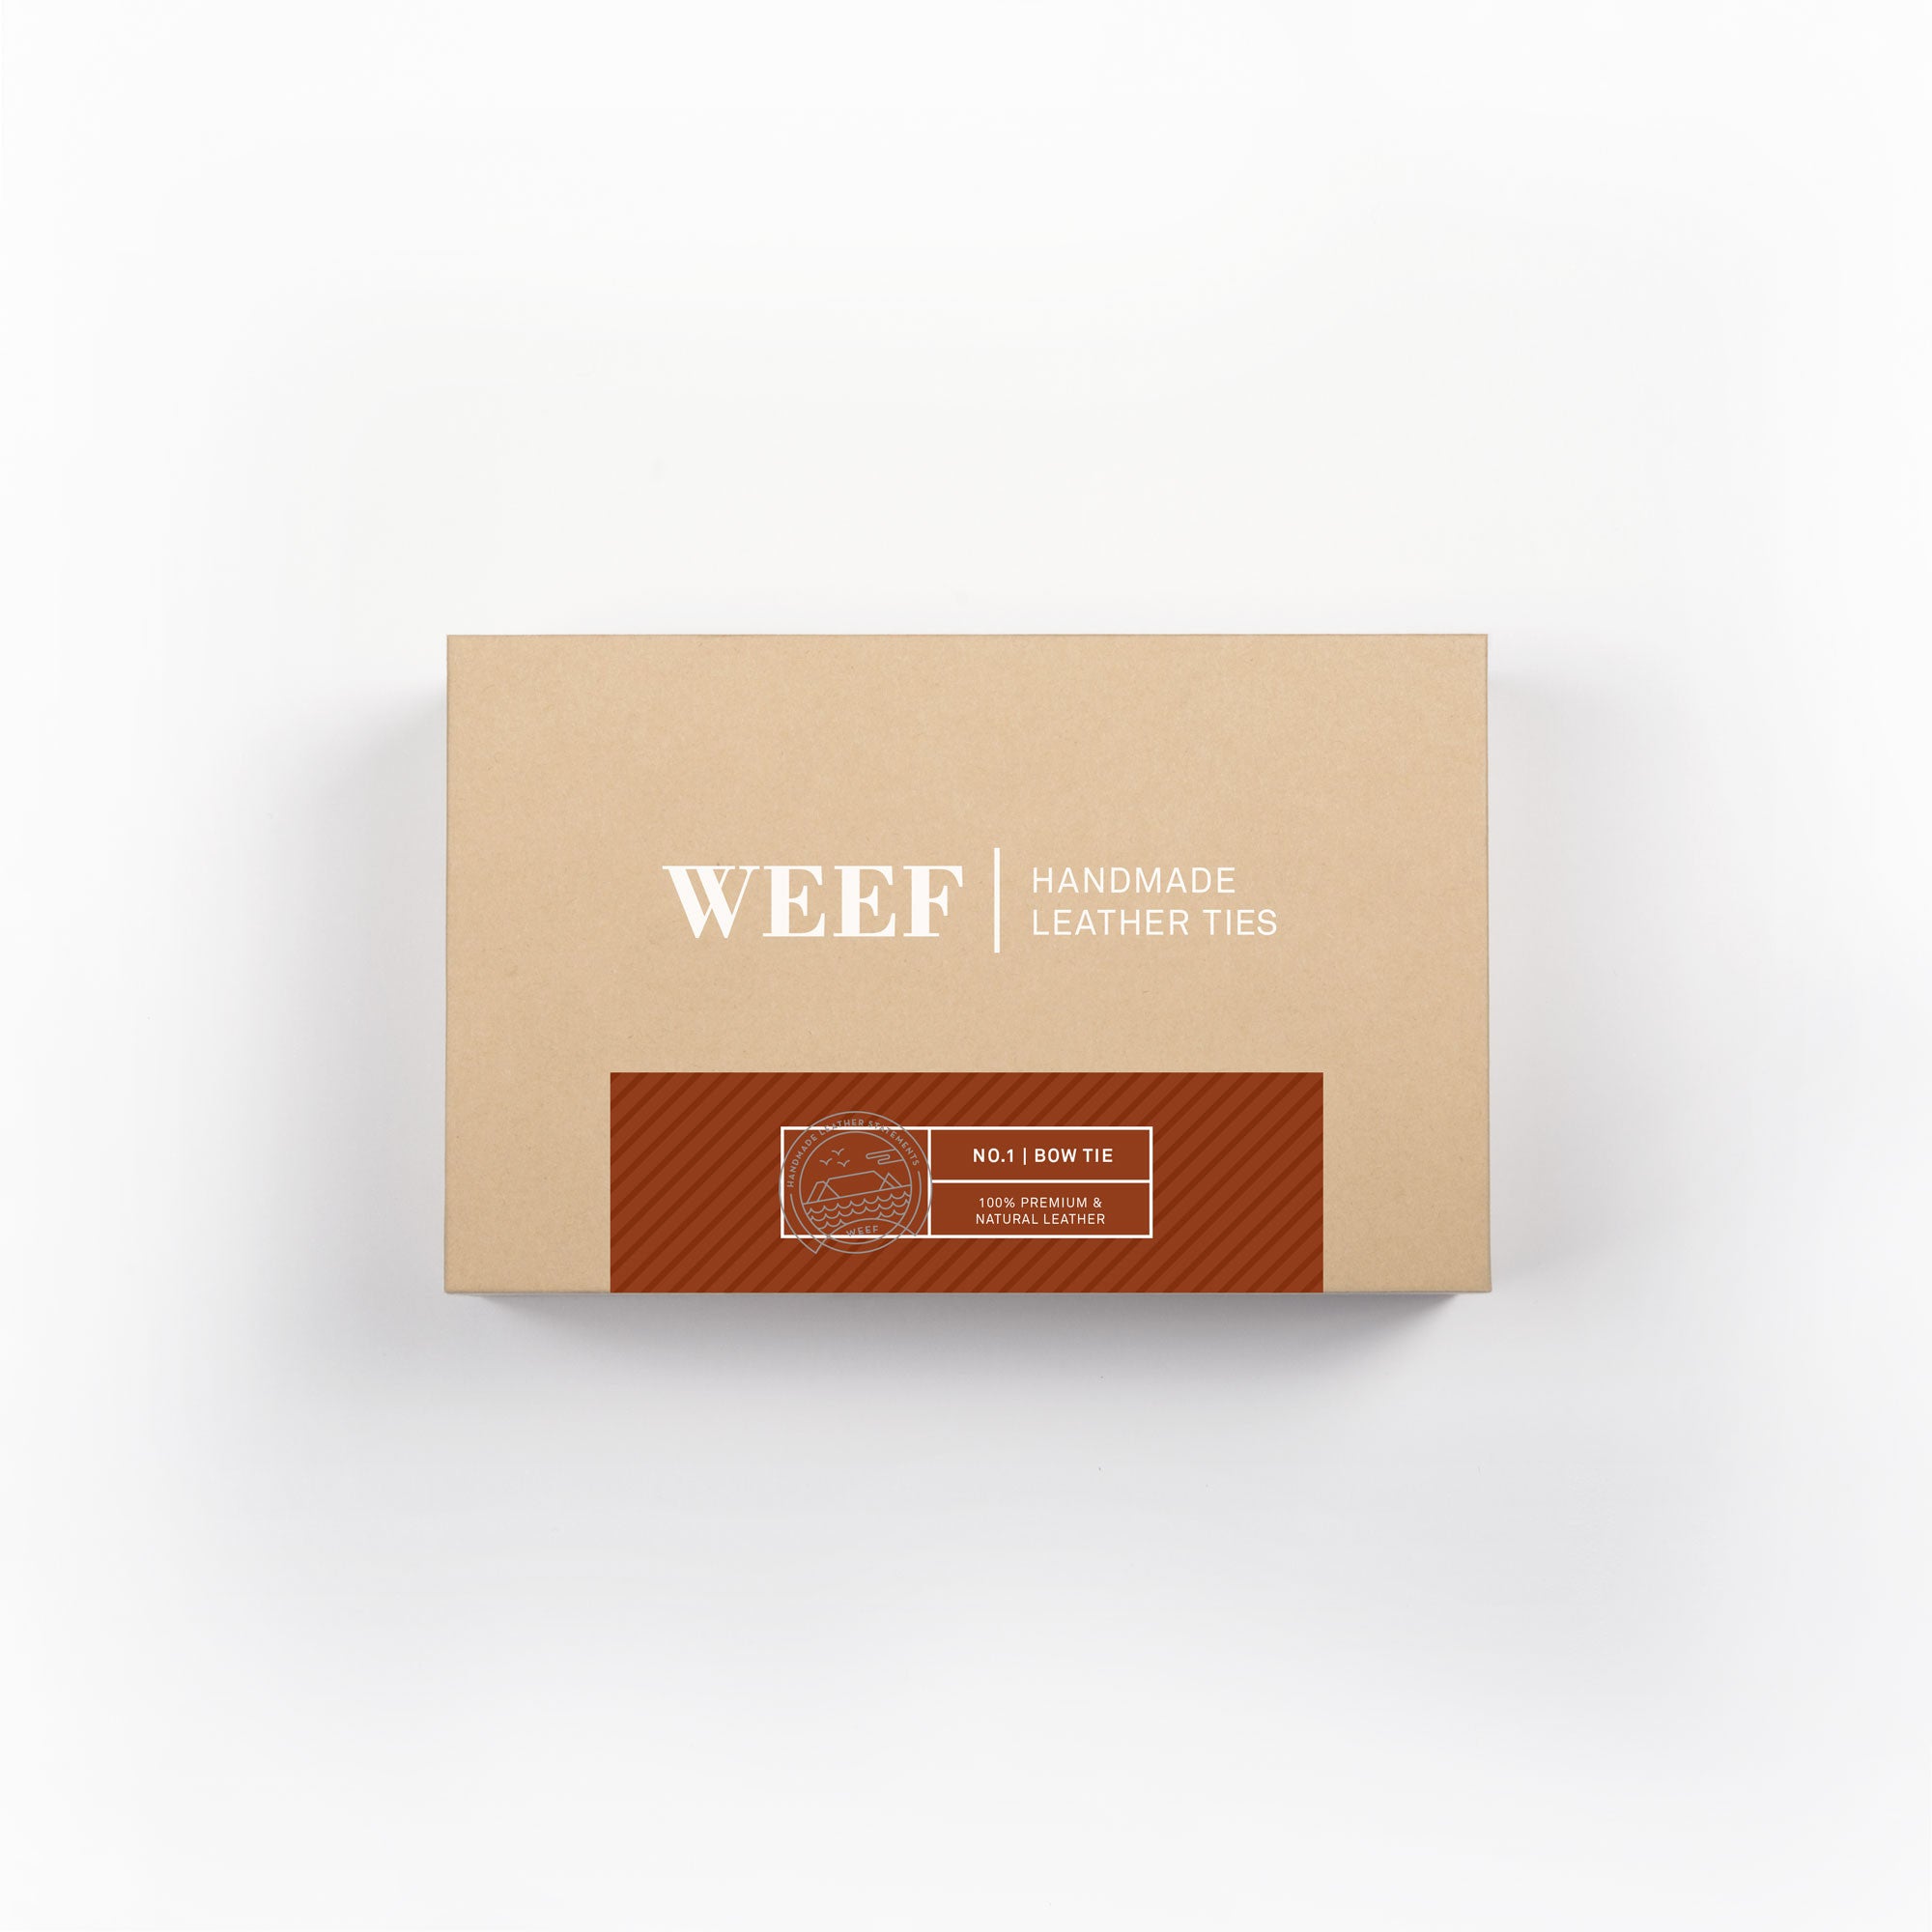 This is the premium packaging box of the cognac tan WEEF handmade leather bow tie.